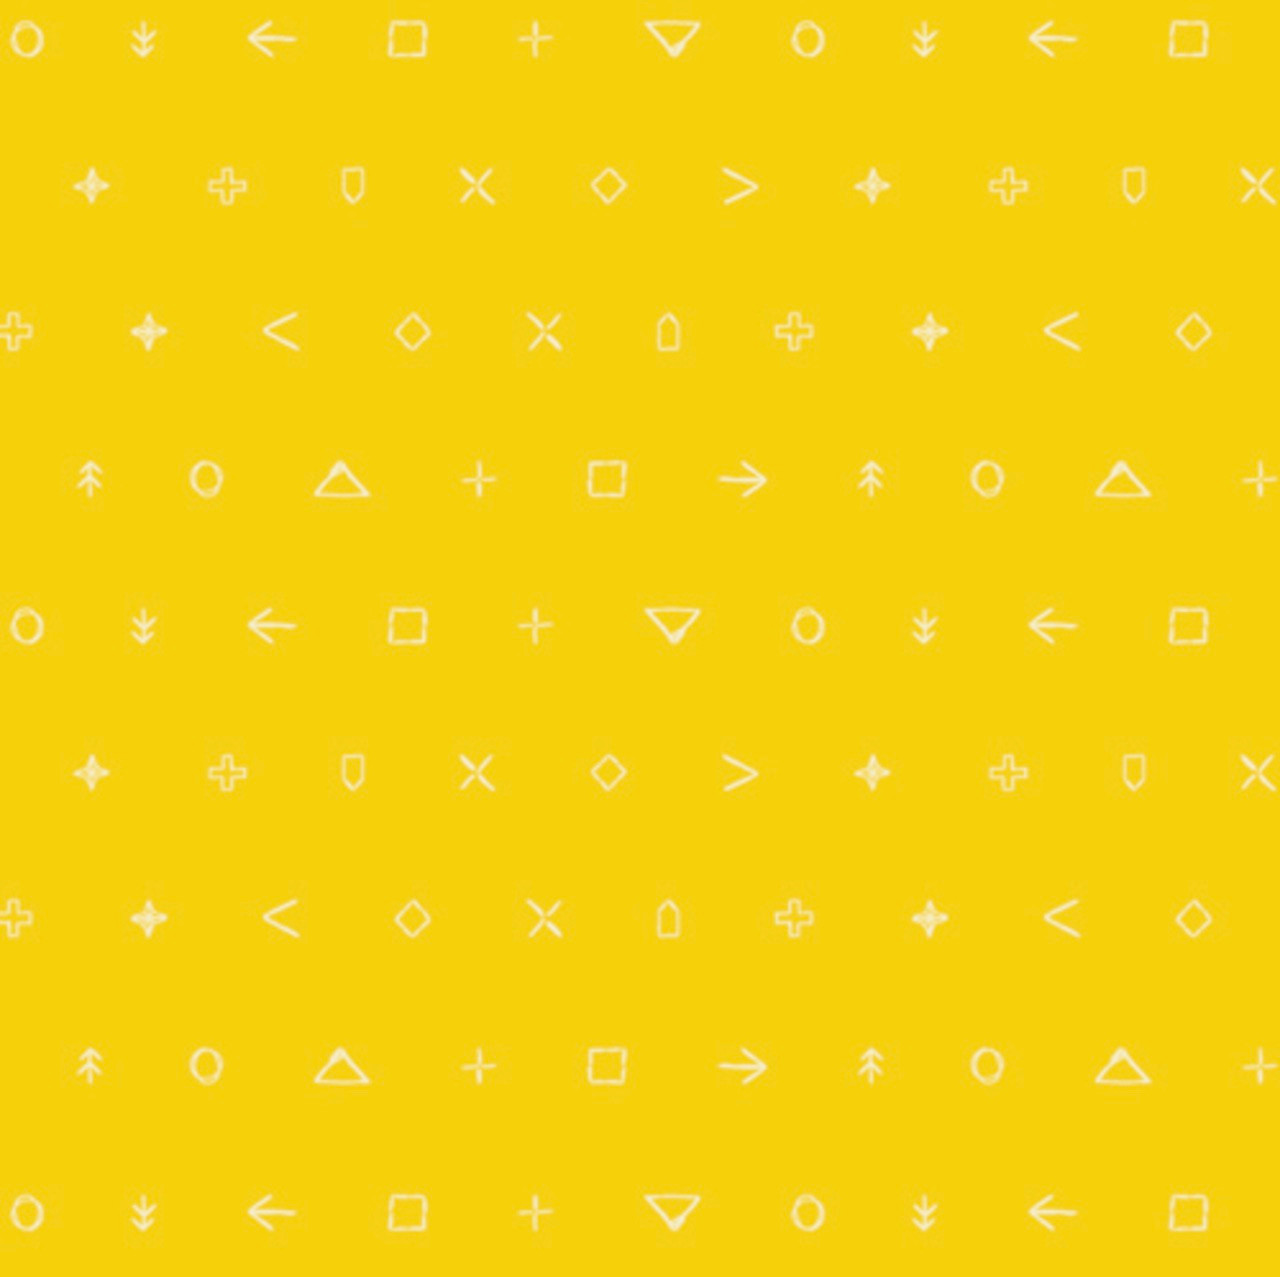 A sample of 100% cotton fabric in yellow with a subtle geometric pattern, part of the Icon Elements collection by Art Gallery Fabrics, named Golden Token.